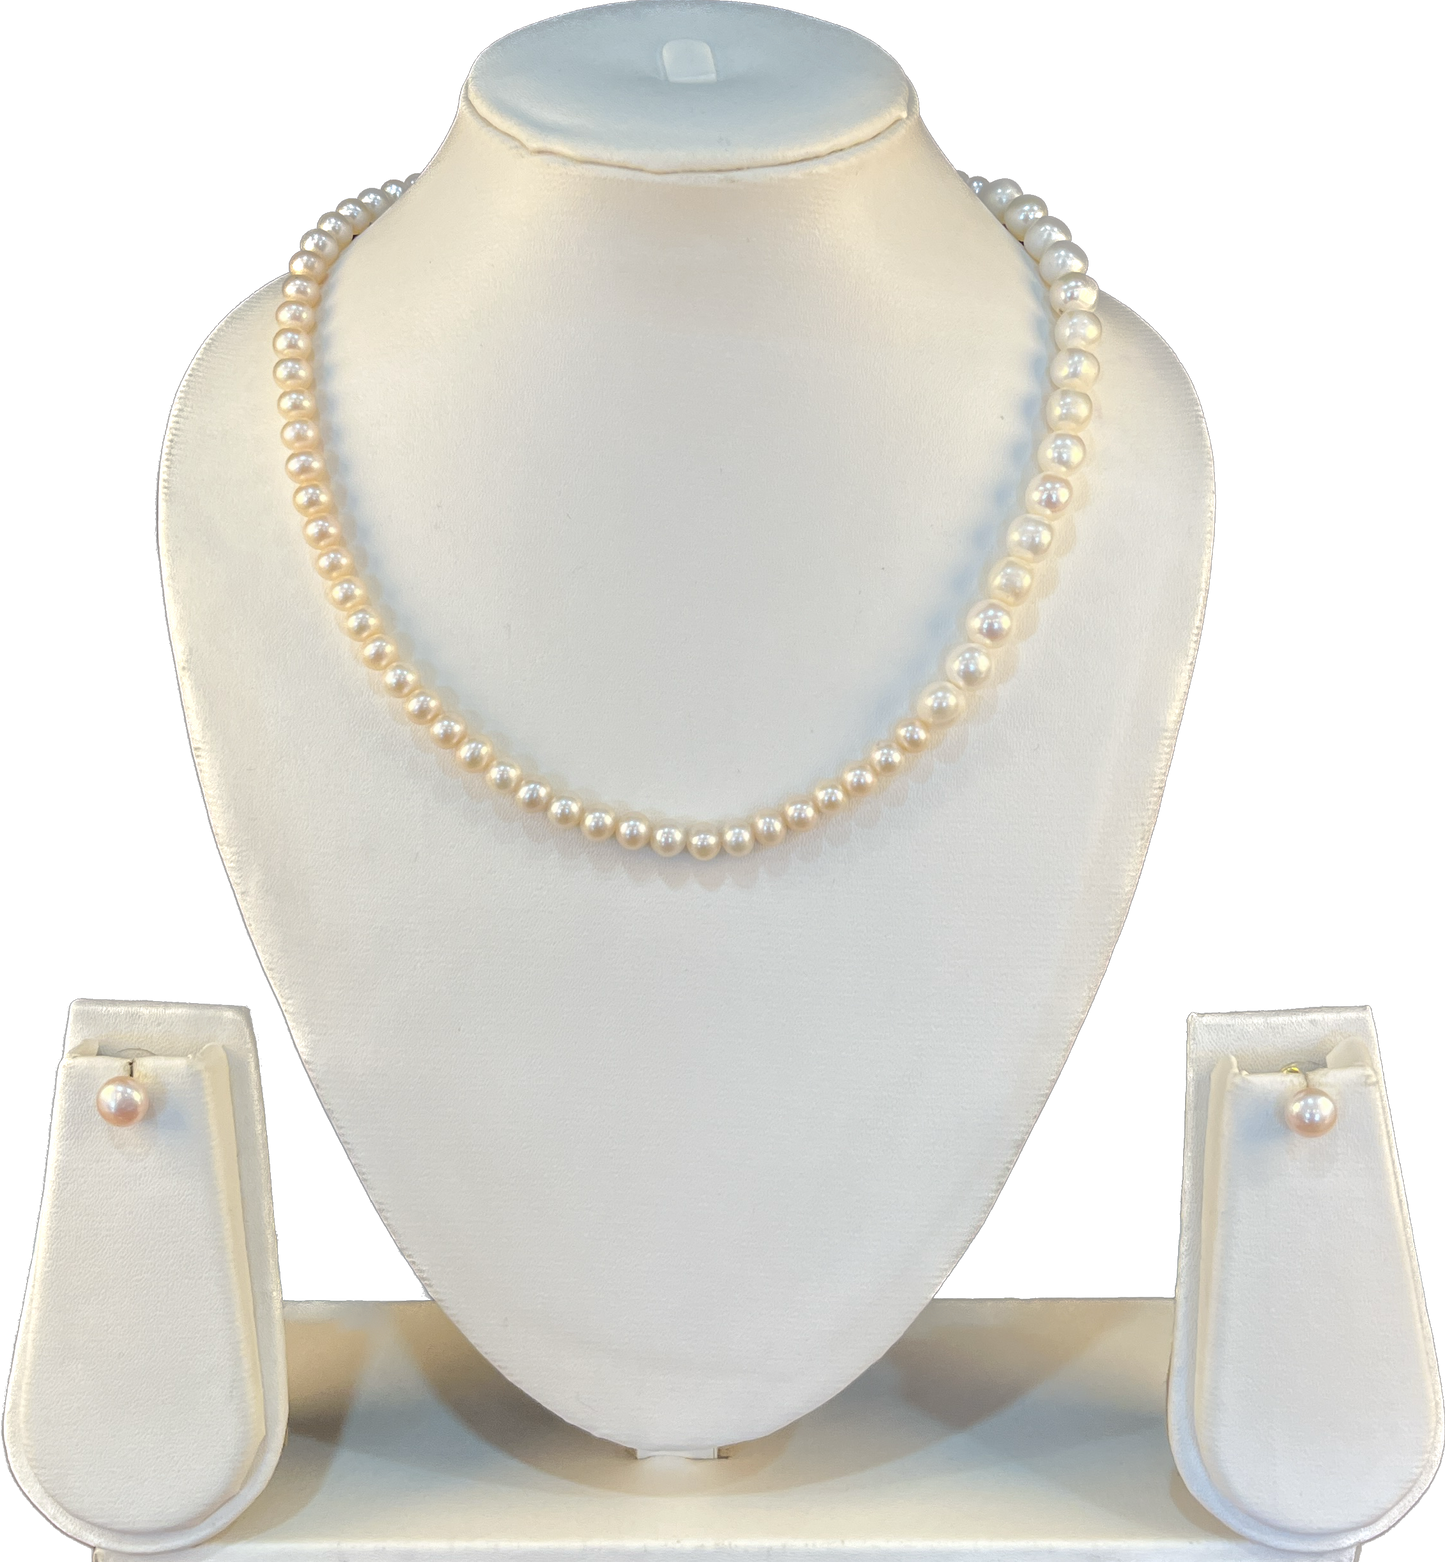 My Pearls 6mm Pink & 8 mm White Pearls Necklace set